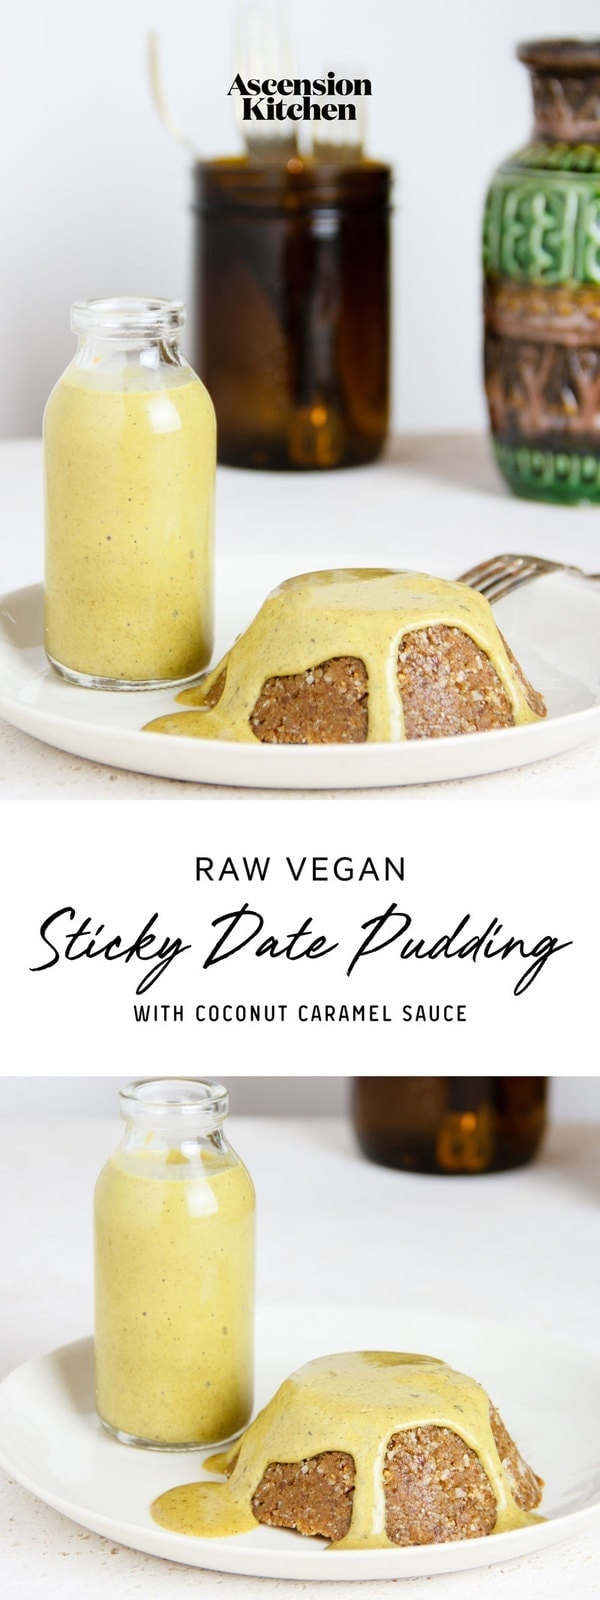 Raw Vegan Sticky Date Pudding with a Coconut Caramel Sauce. Gluten free. #veganstickydatepudding #veganstickydatepuddingrecipe #vegancaramelsauce #vegancaramelsaucerecipe #vegandessertrecipe #rawvegandesserts #rawvegandessertrecipes #AscensionKitchen // Pin to your own inspiration board! //